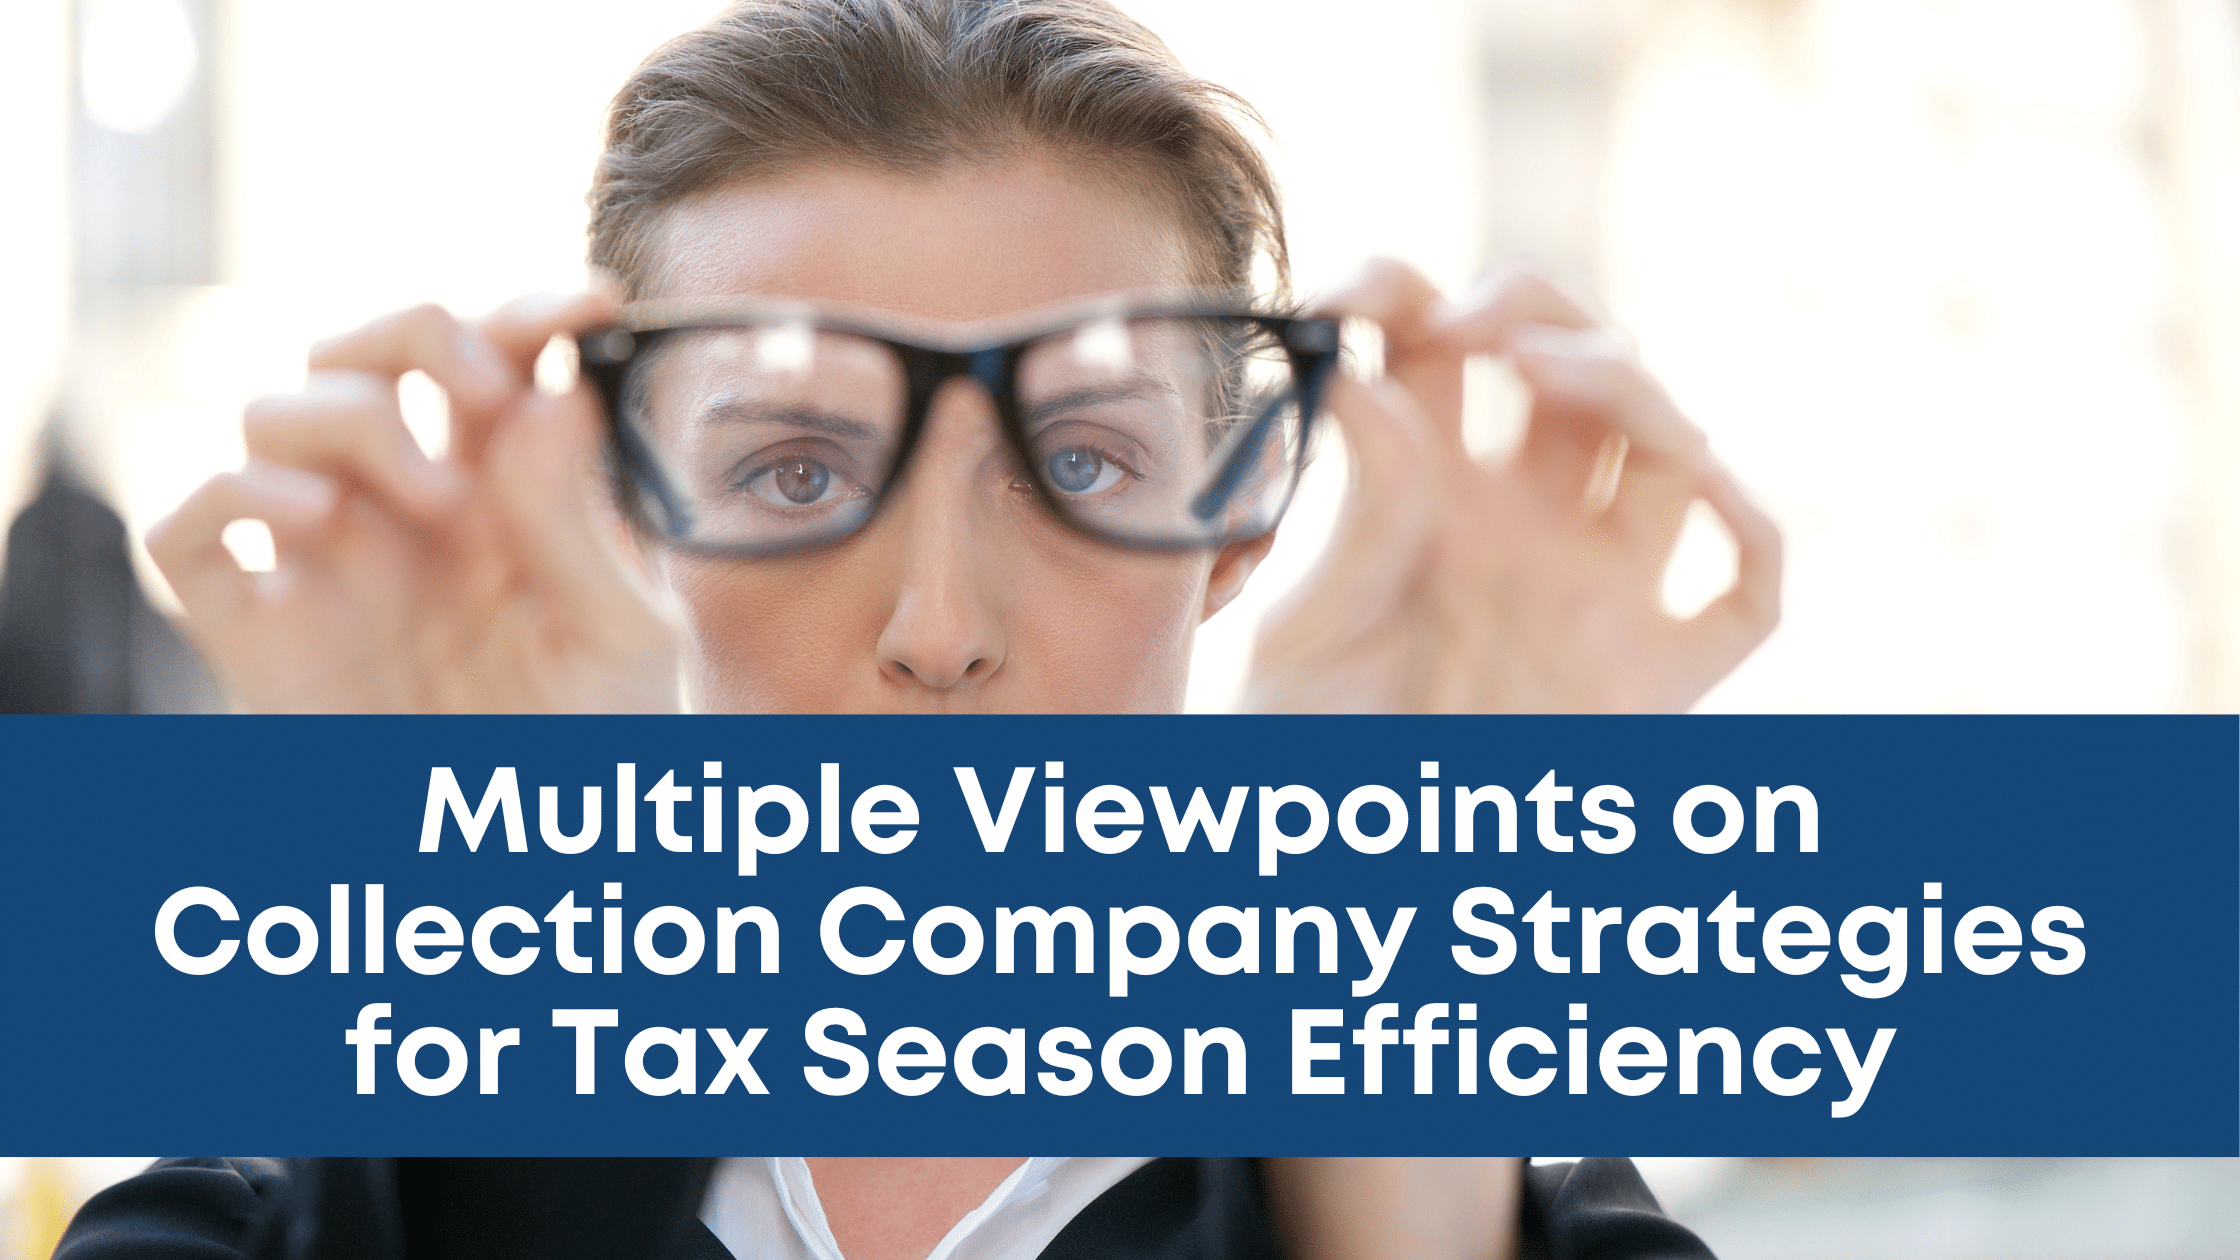 Multiple Viewpoints on Collection Company Strategies for Tax Season Efficiency